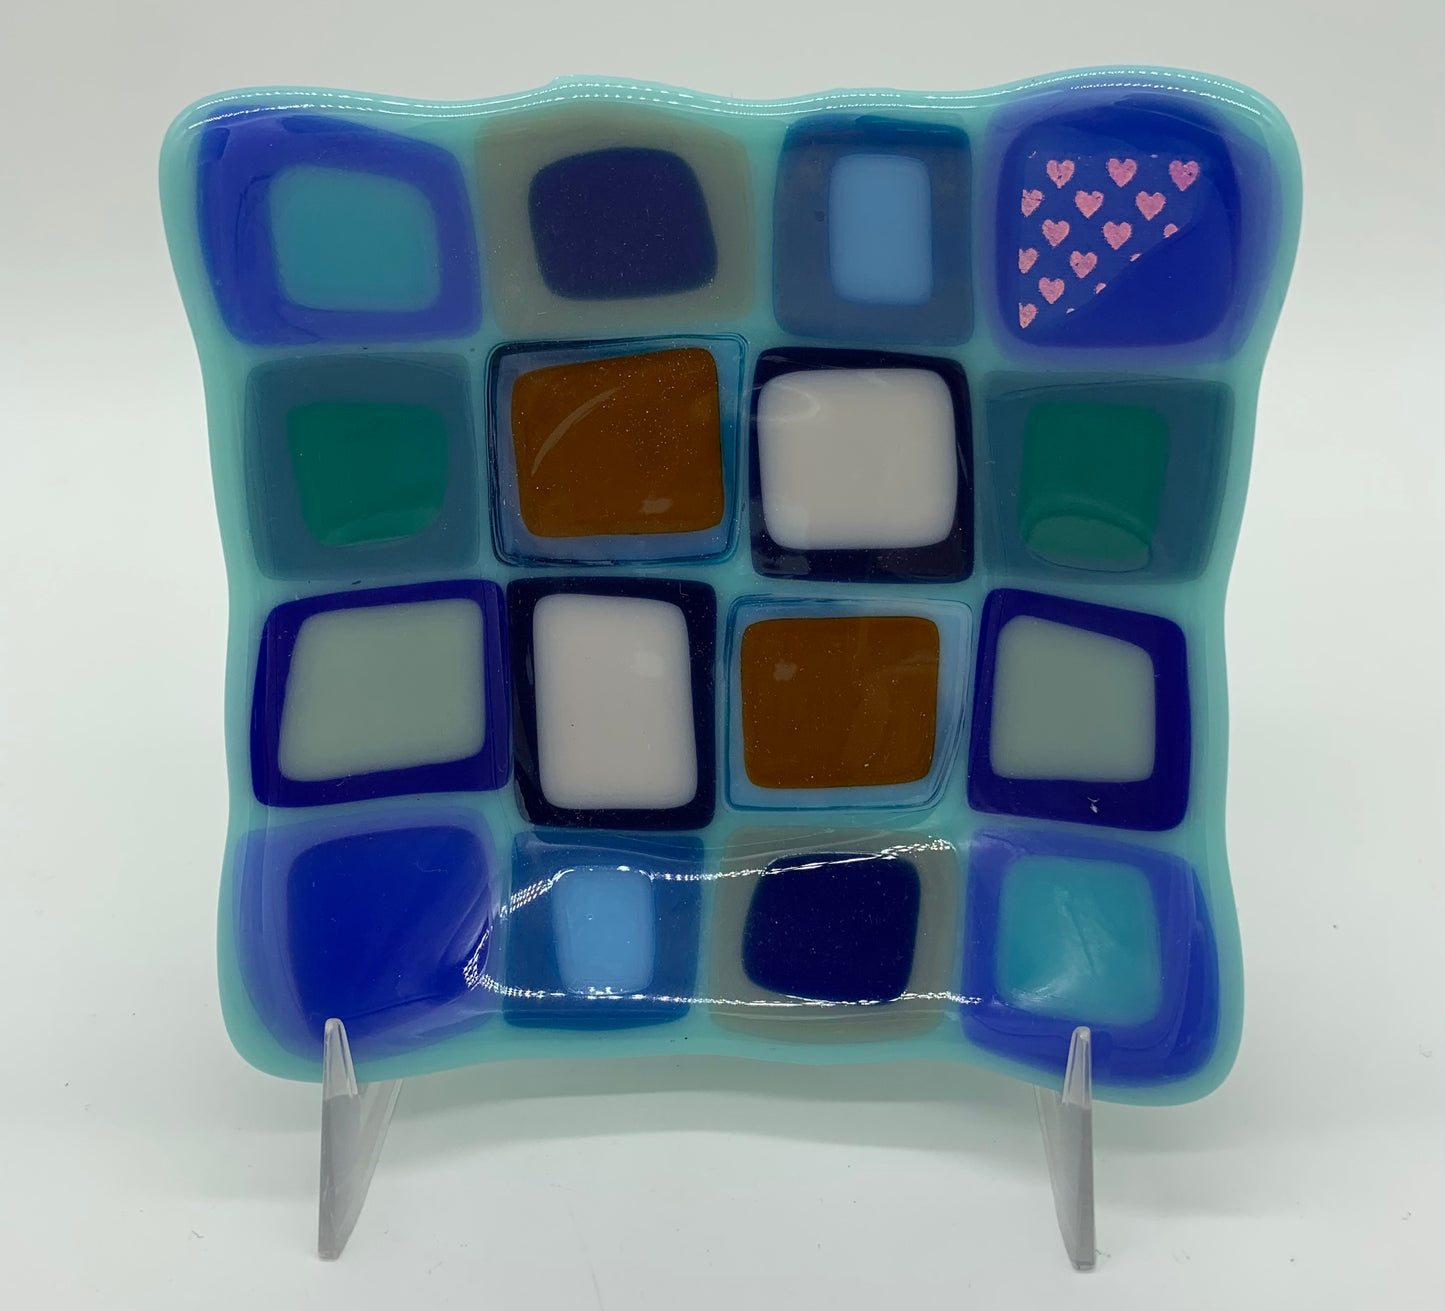 Simple Square Bowl - Double Mosaic on Cyan